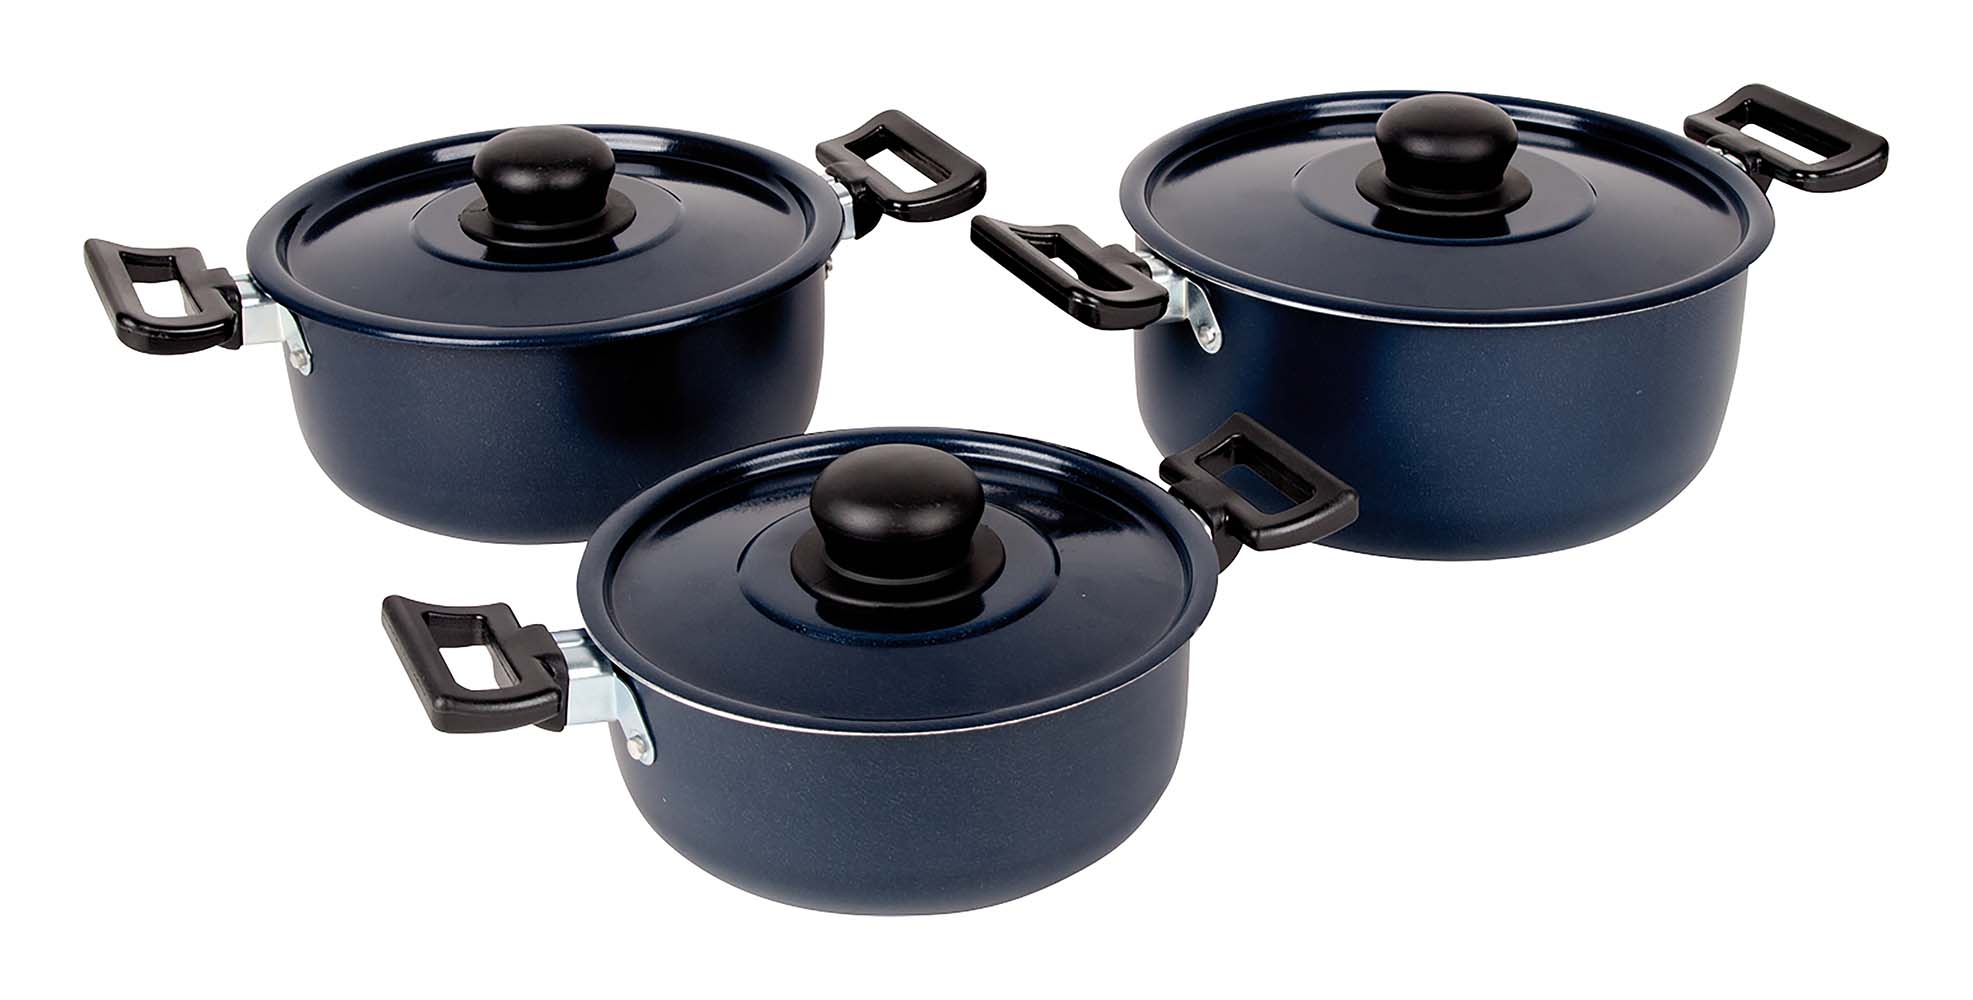 2300342 A 3 piece cookware set. These cooking pans are made from lightweight aluminium. Every pan is also equipped with comfortable and heat-resistant handles, a non-stick layer and a lid. Can be used on gas. Dimensions (Øxh): 20x9.5, 18x8.5 and 16x7.5 cm. Contents: 1,4, 2 and 2.8 litres.